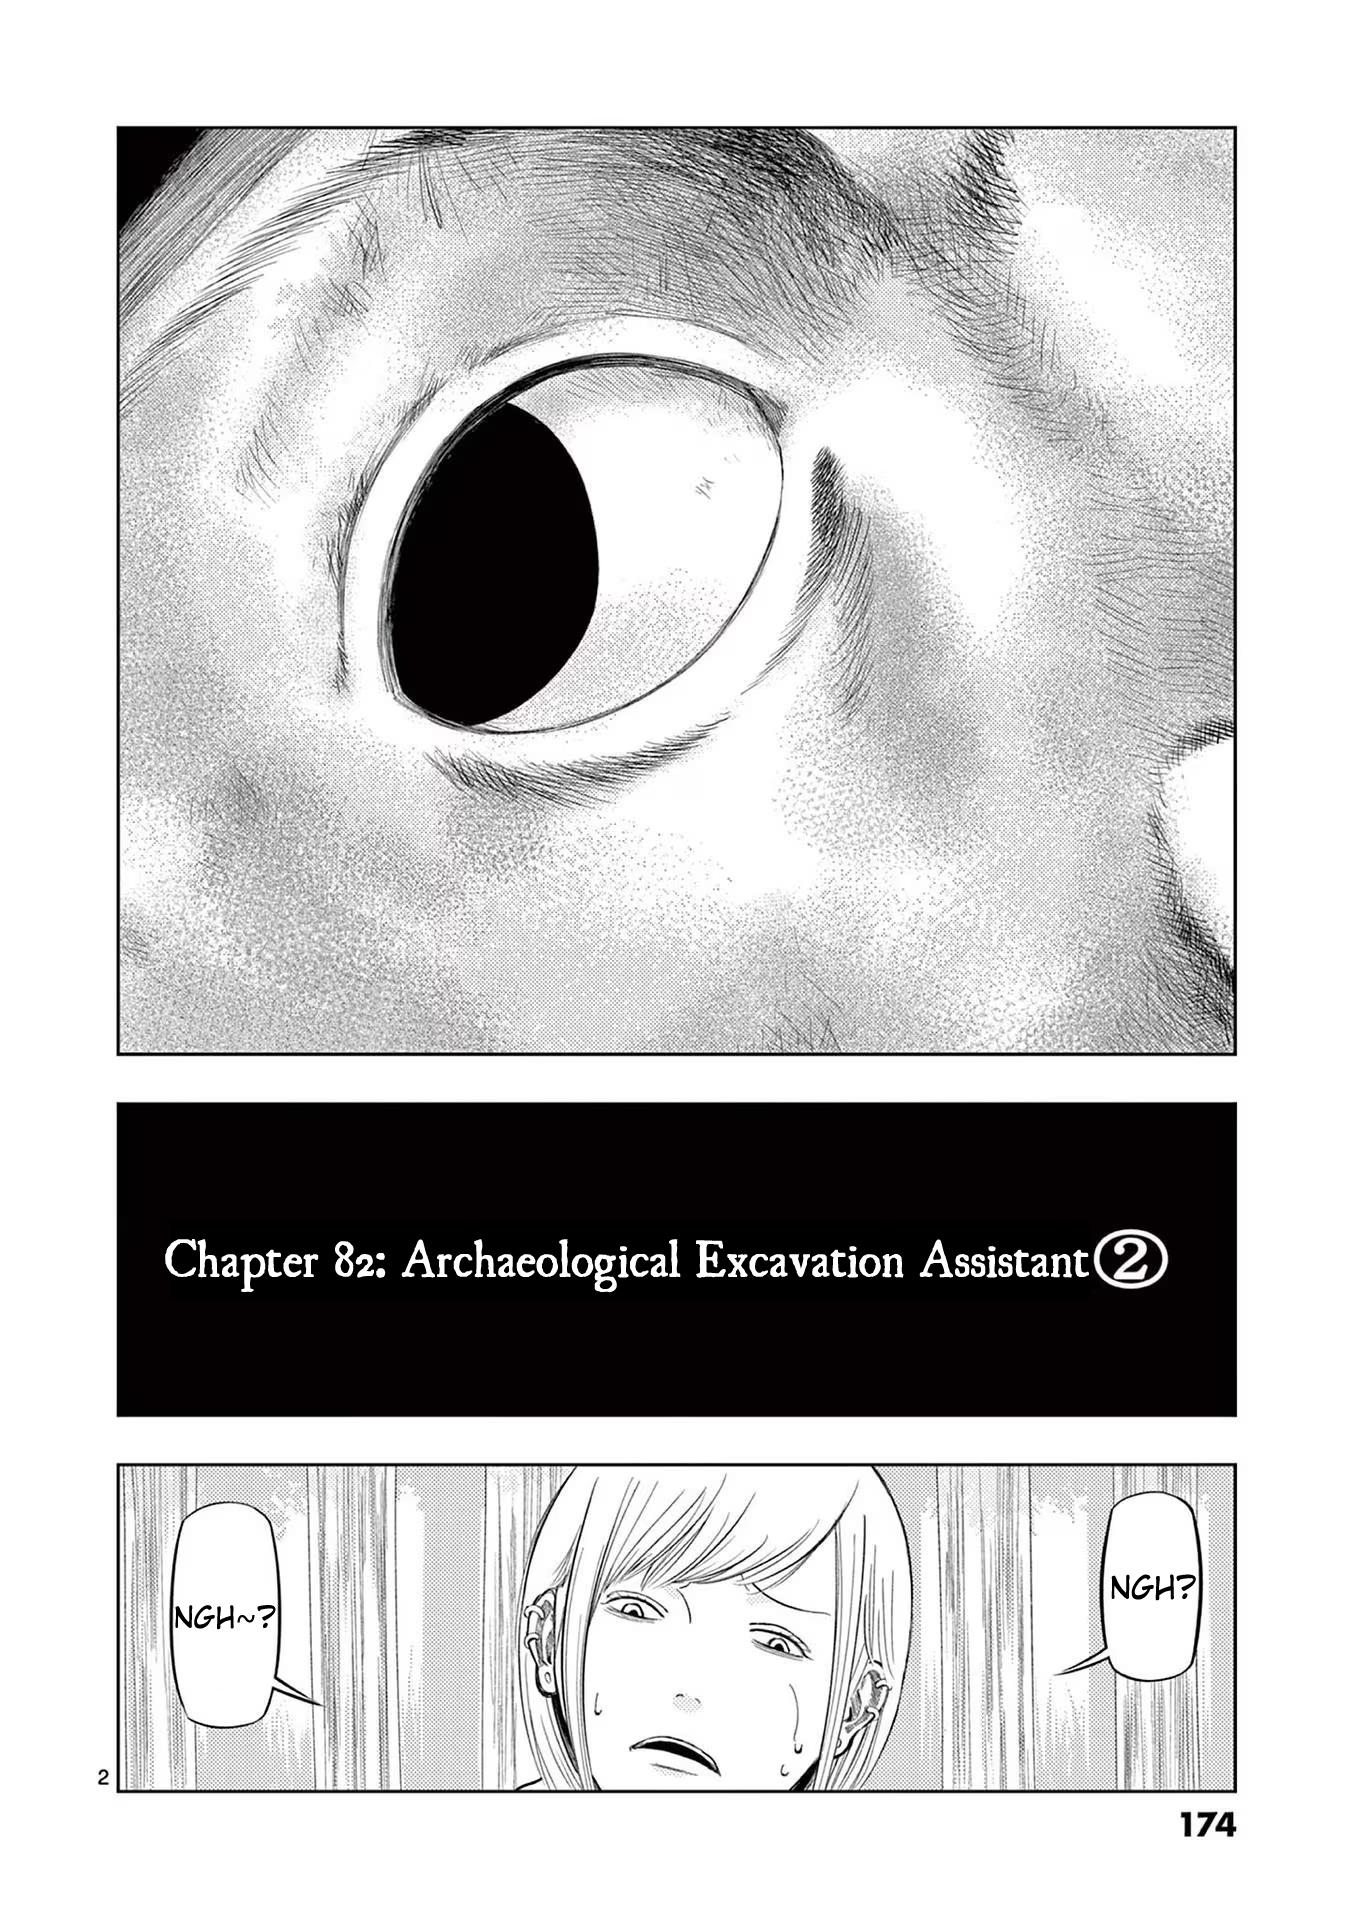 Ura Baito: Toubou Kinshi Vol.7 Chapter 82: Archaeological Excavation Assistant ② - Picture 2